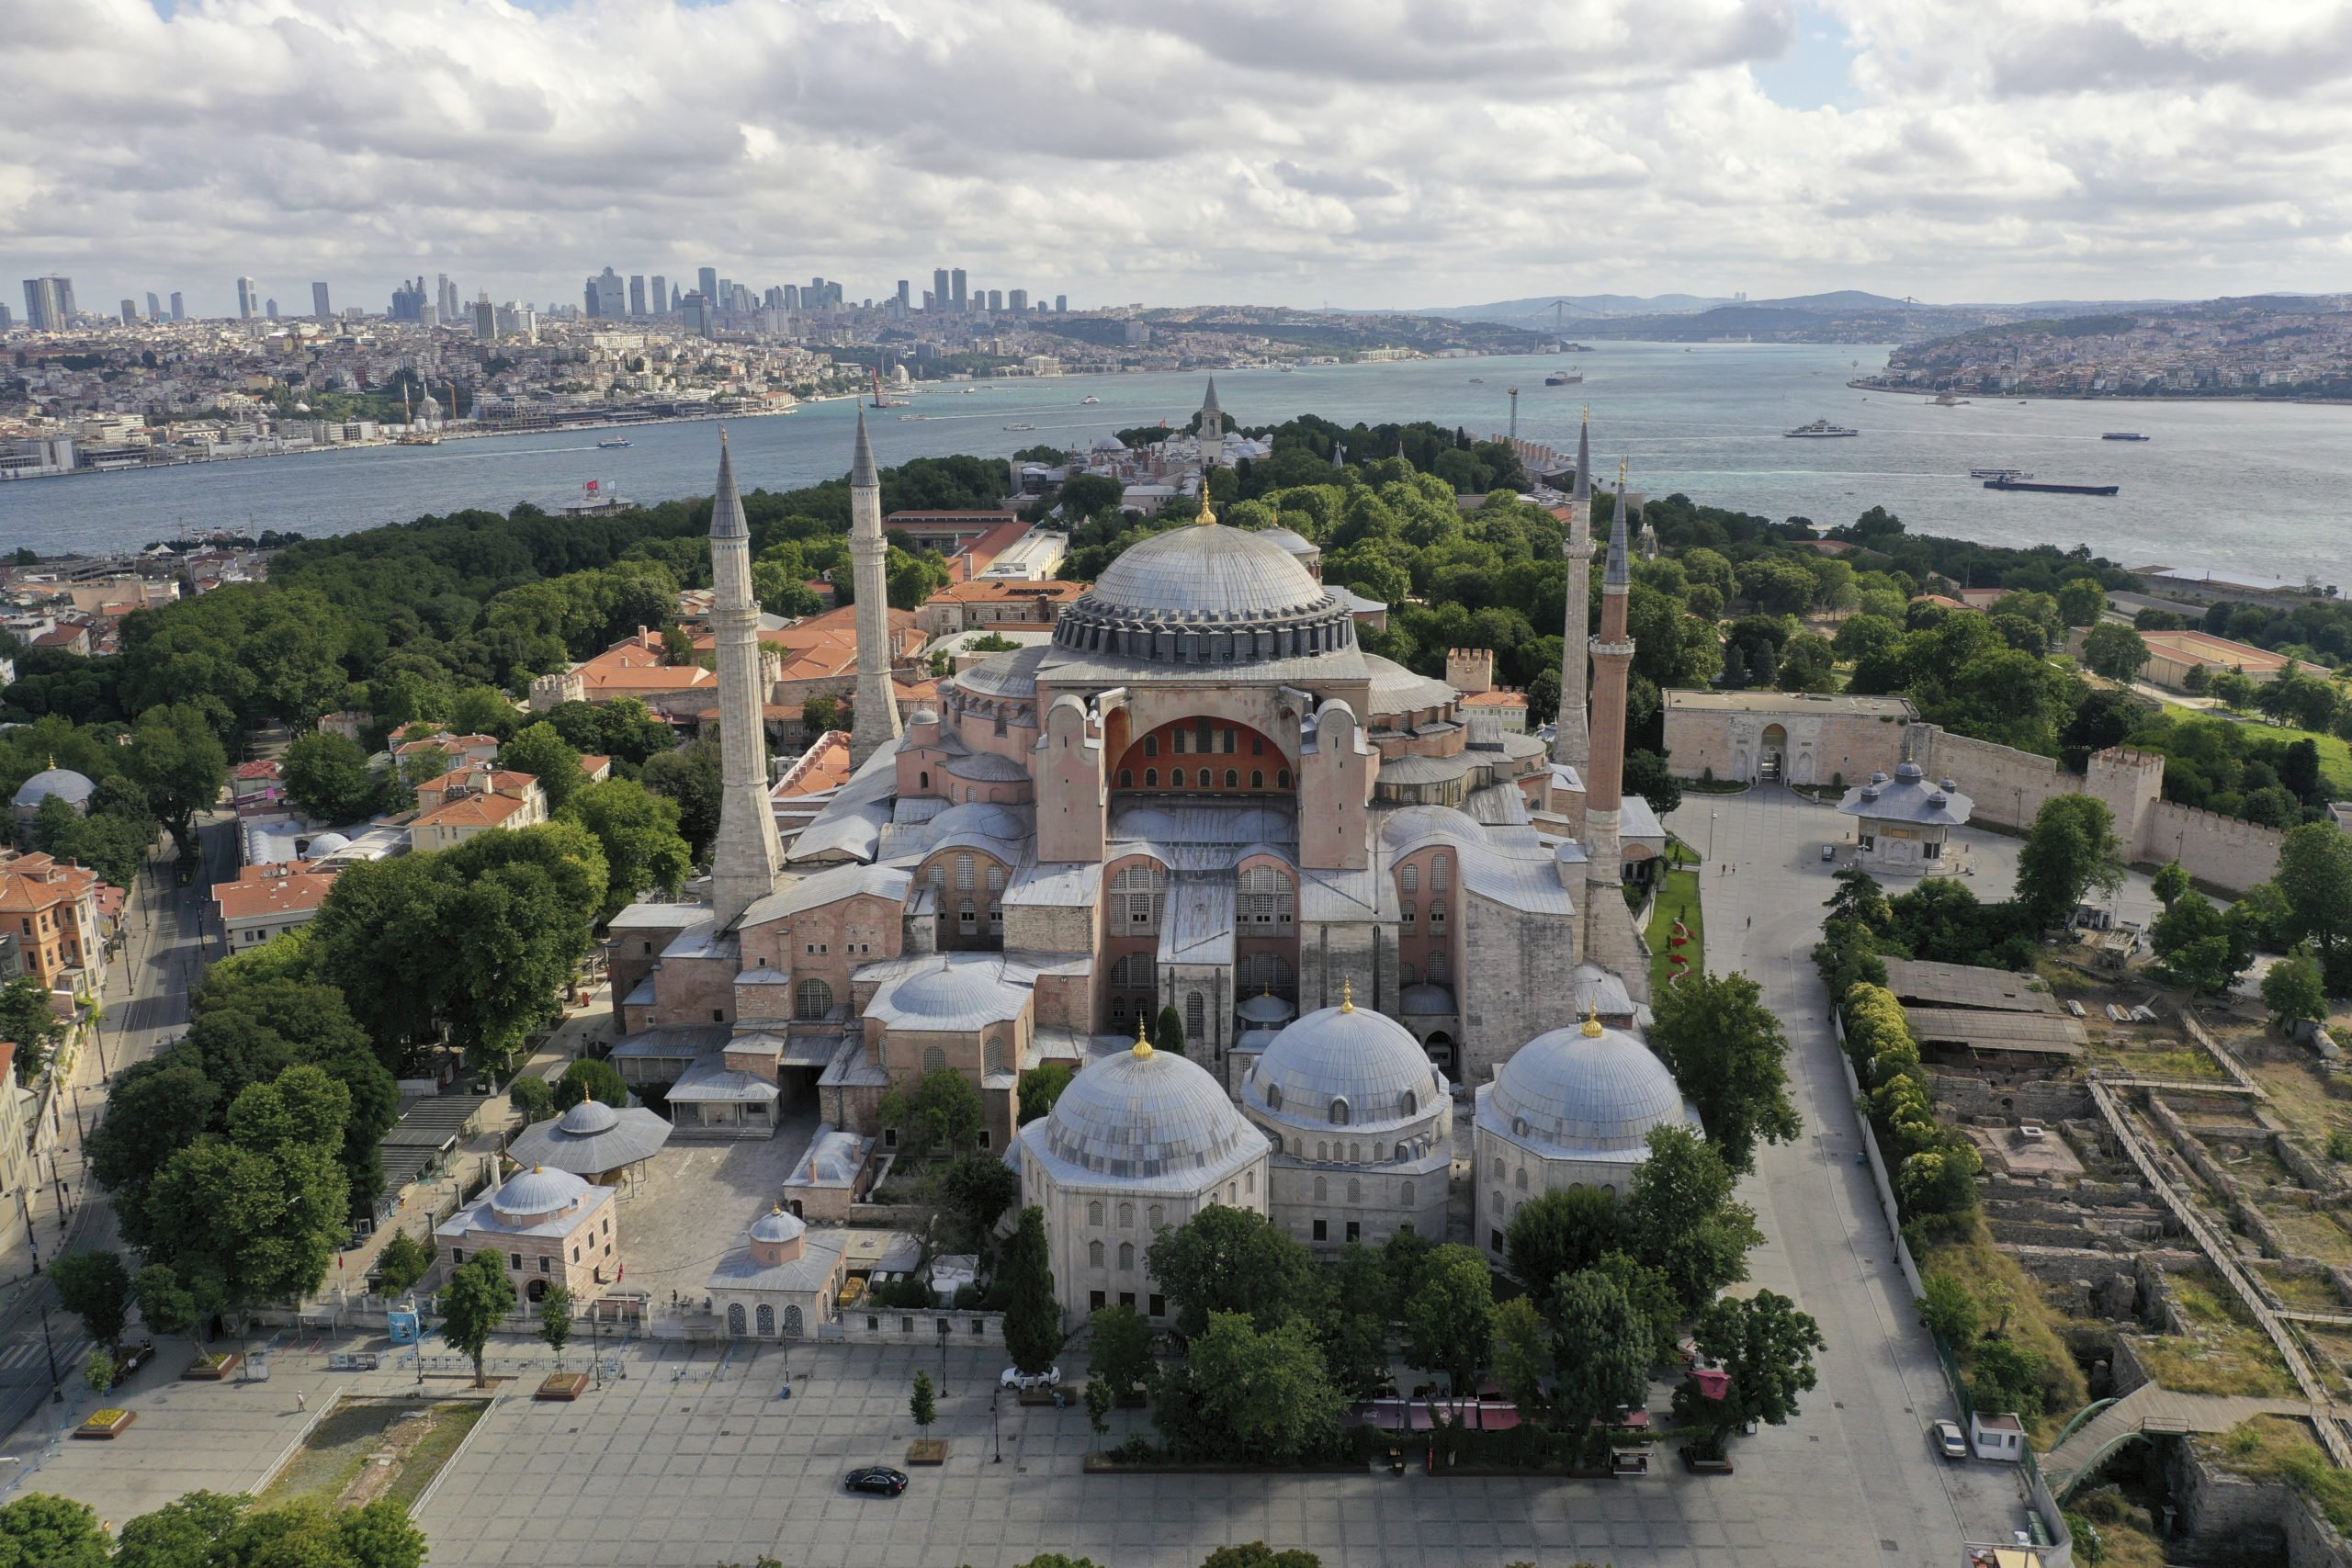 A view of the Hagia Sophia in Istanbul